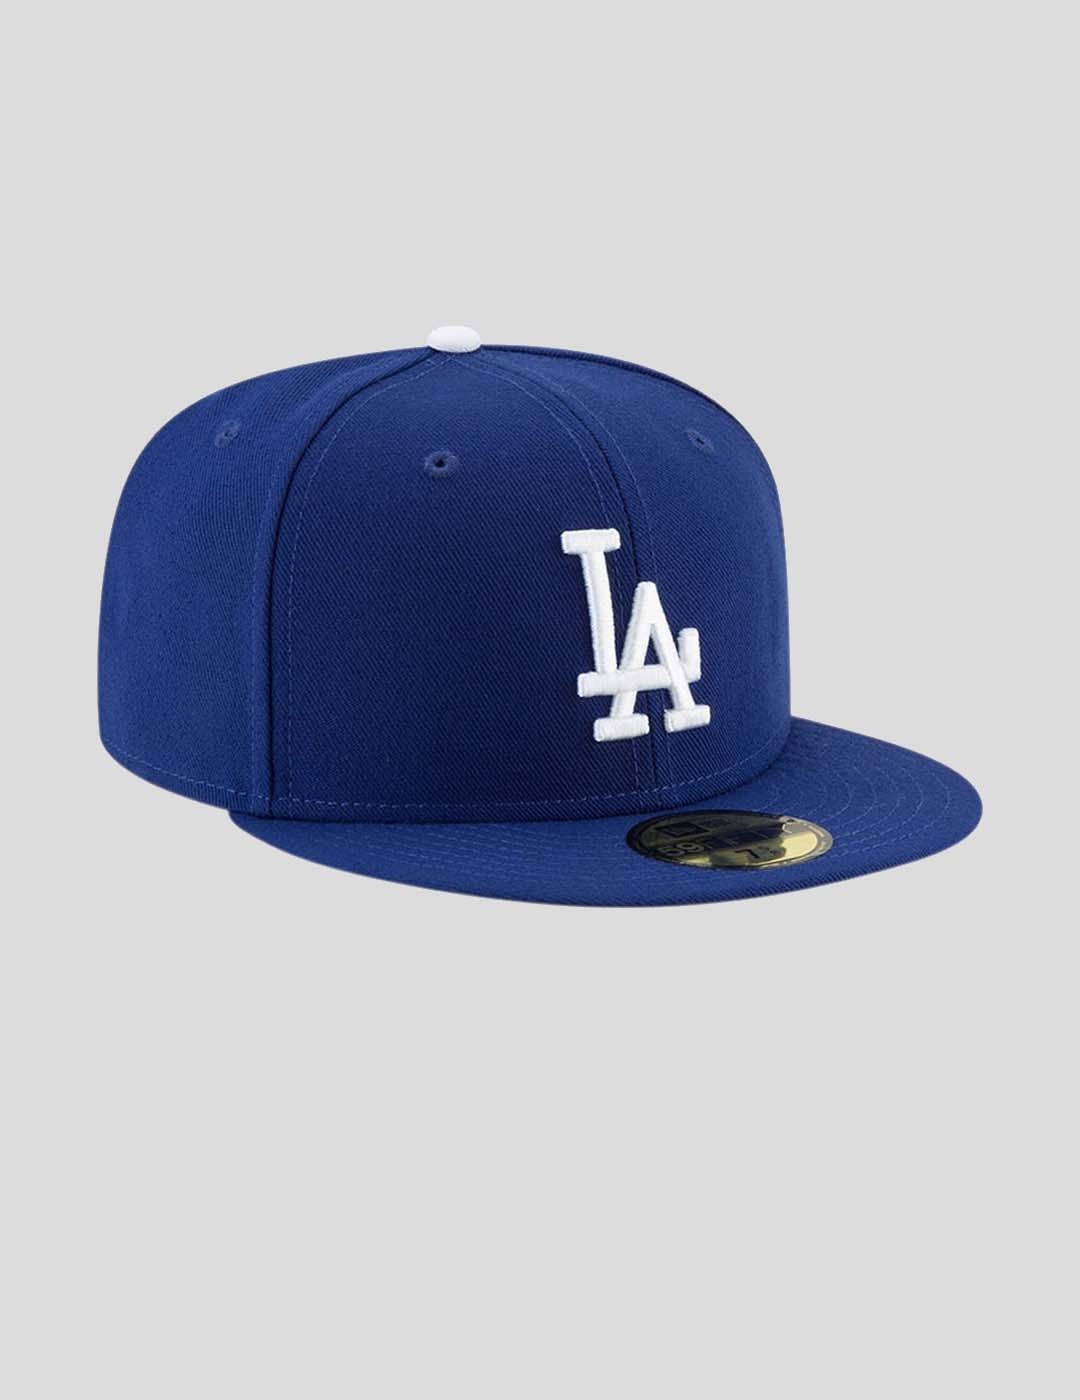 GORRA NEW ERA LA DODGERS MLB 59FIFTY FITTED  BLUE/WHITE